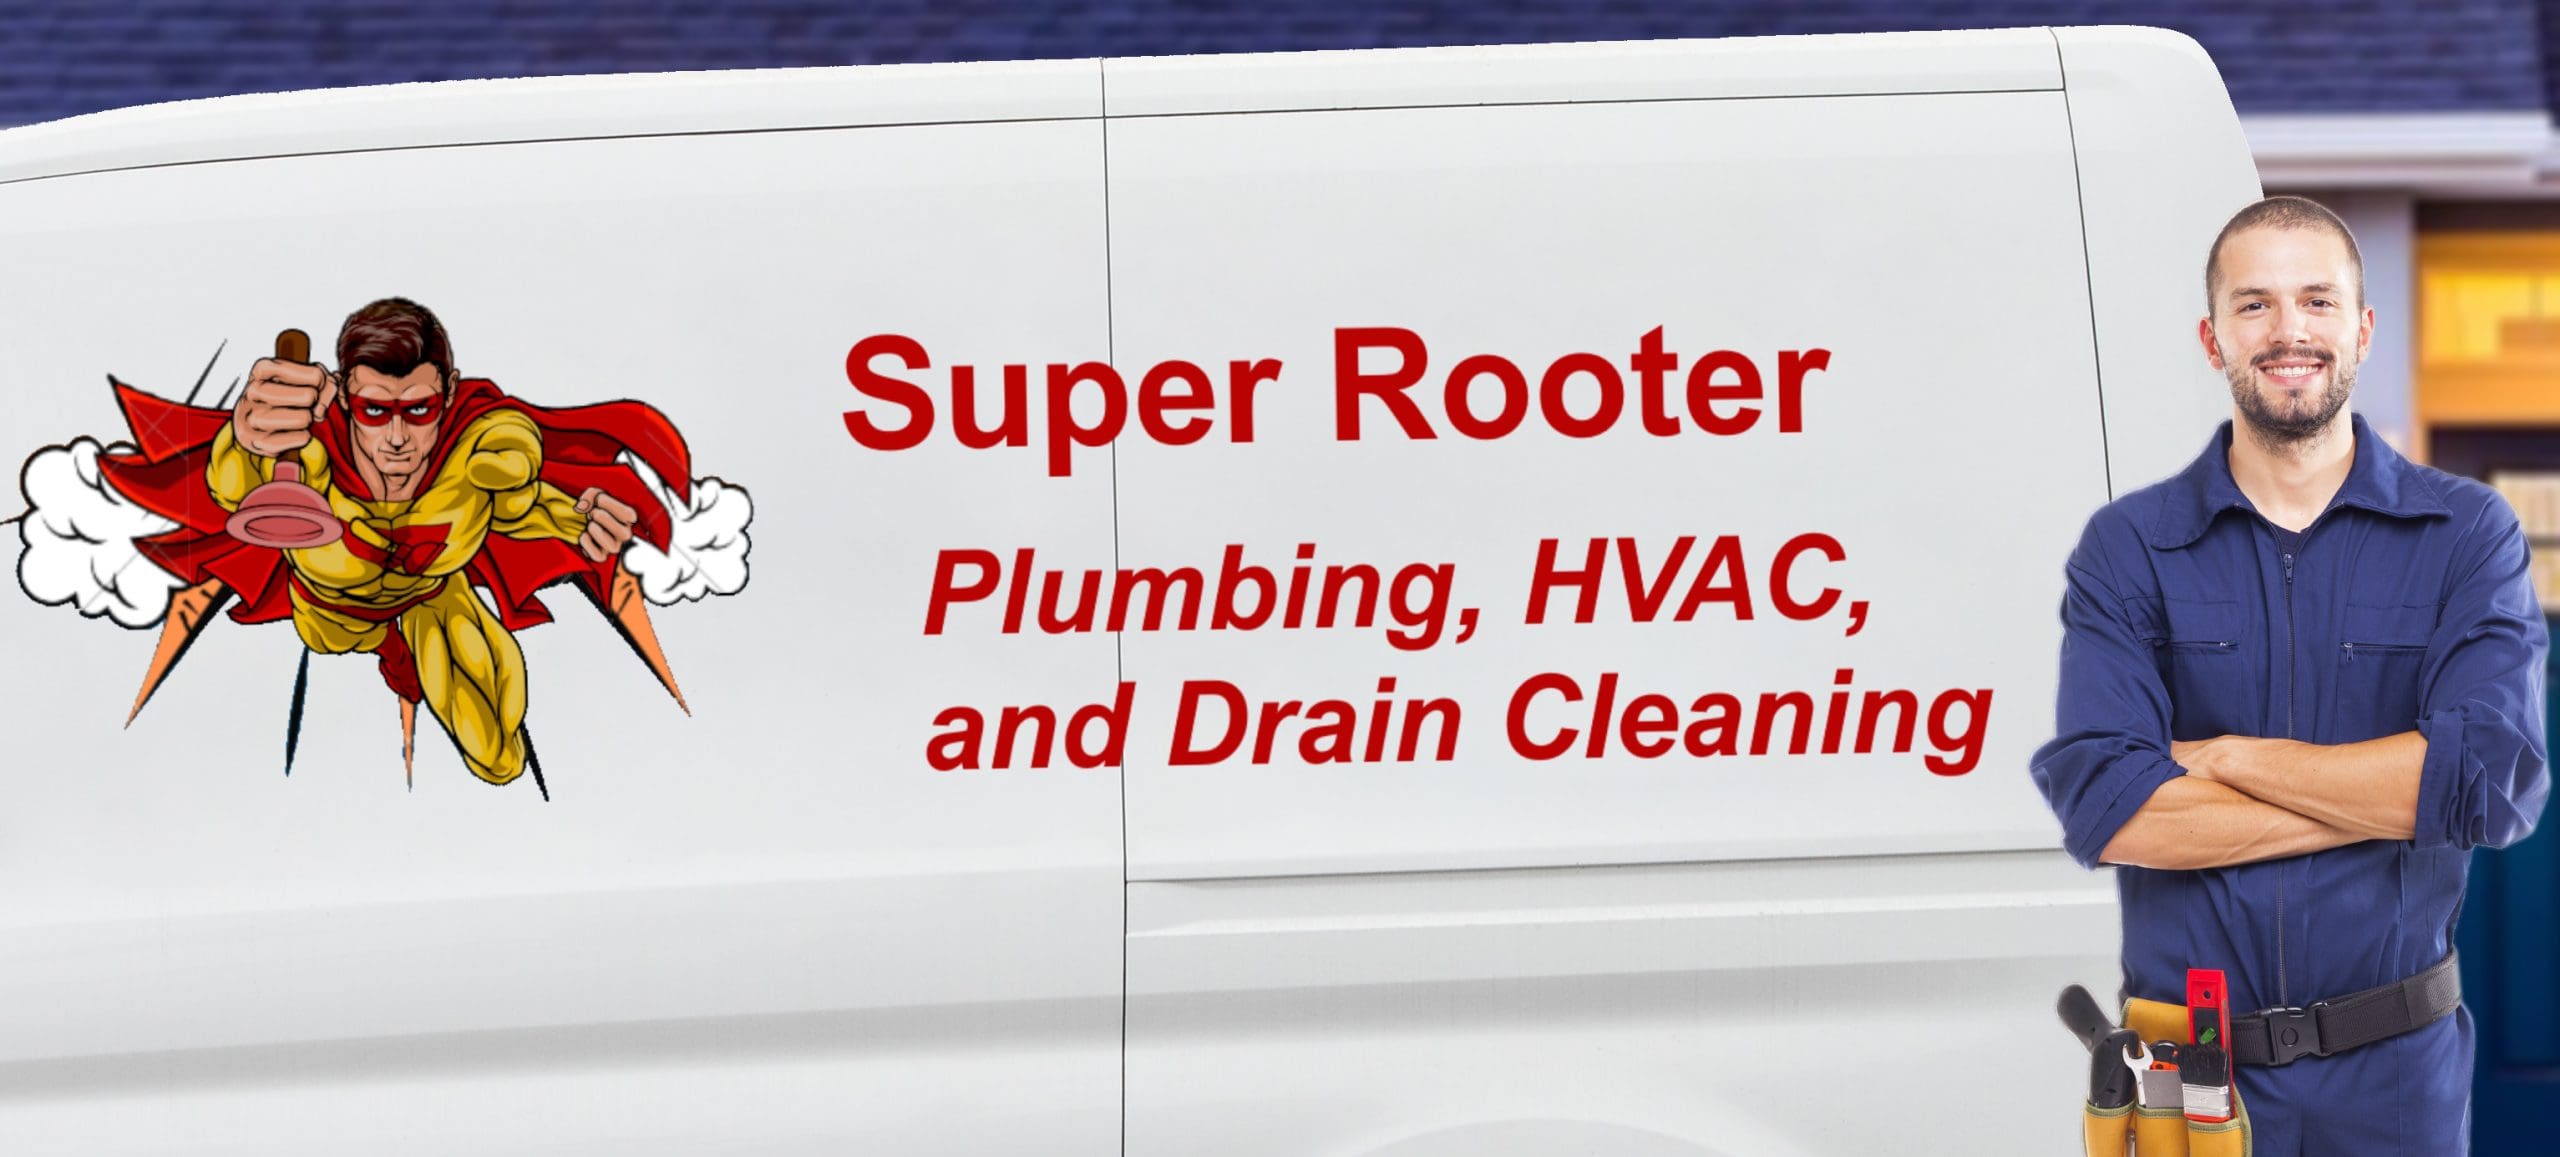 plumbing hvac and drain cleaning